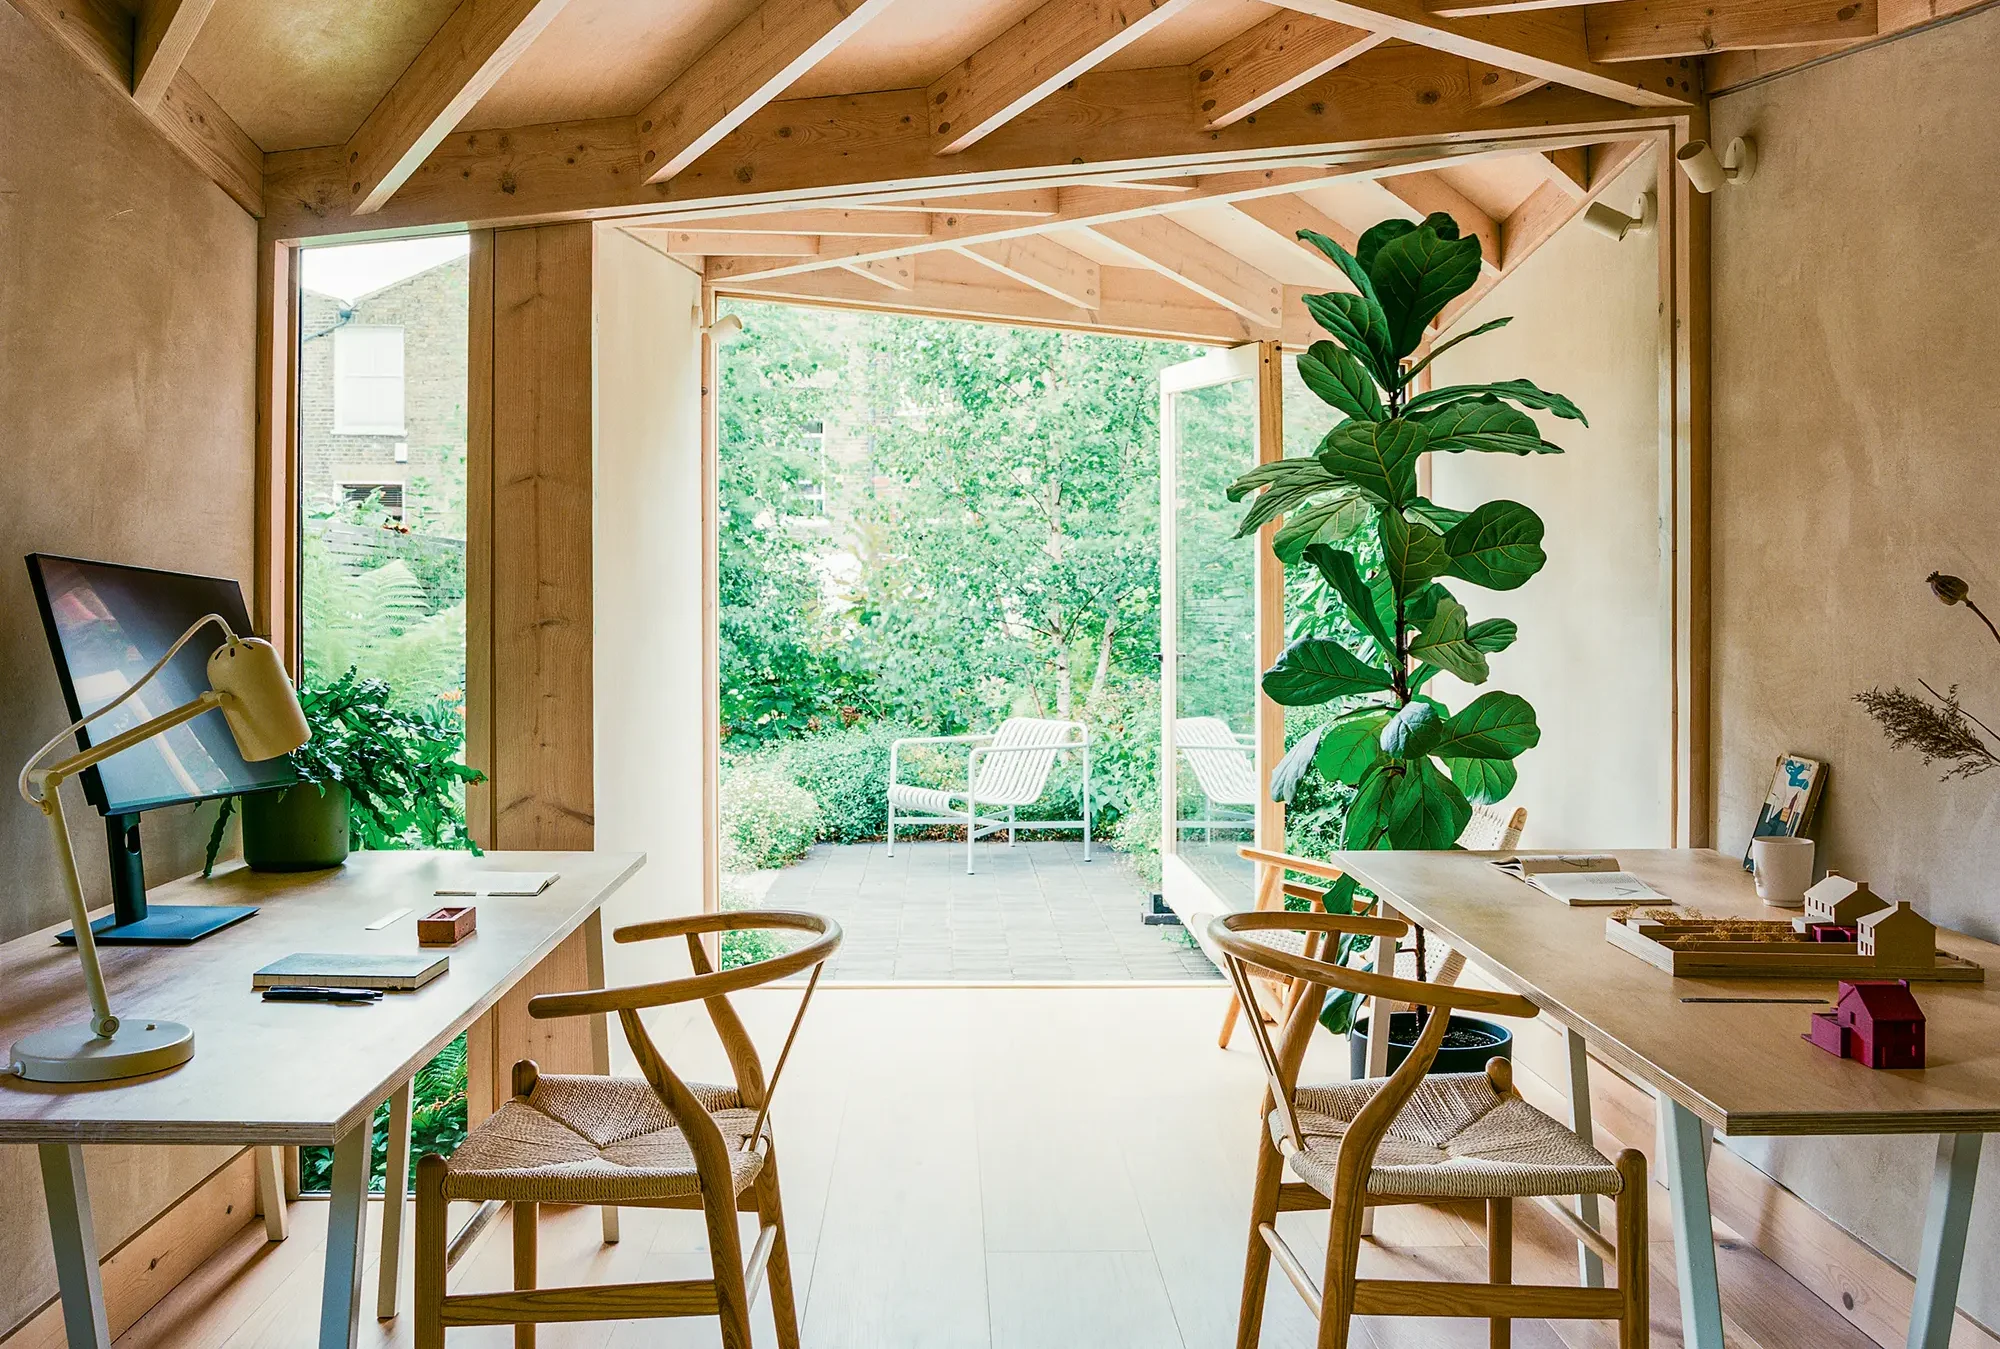 Garden Offices: Your Complete Guide to Building an Office in Your Garden